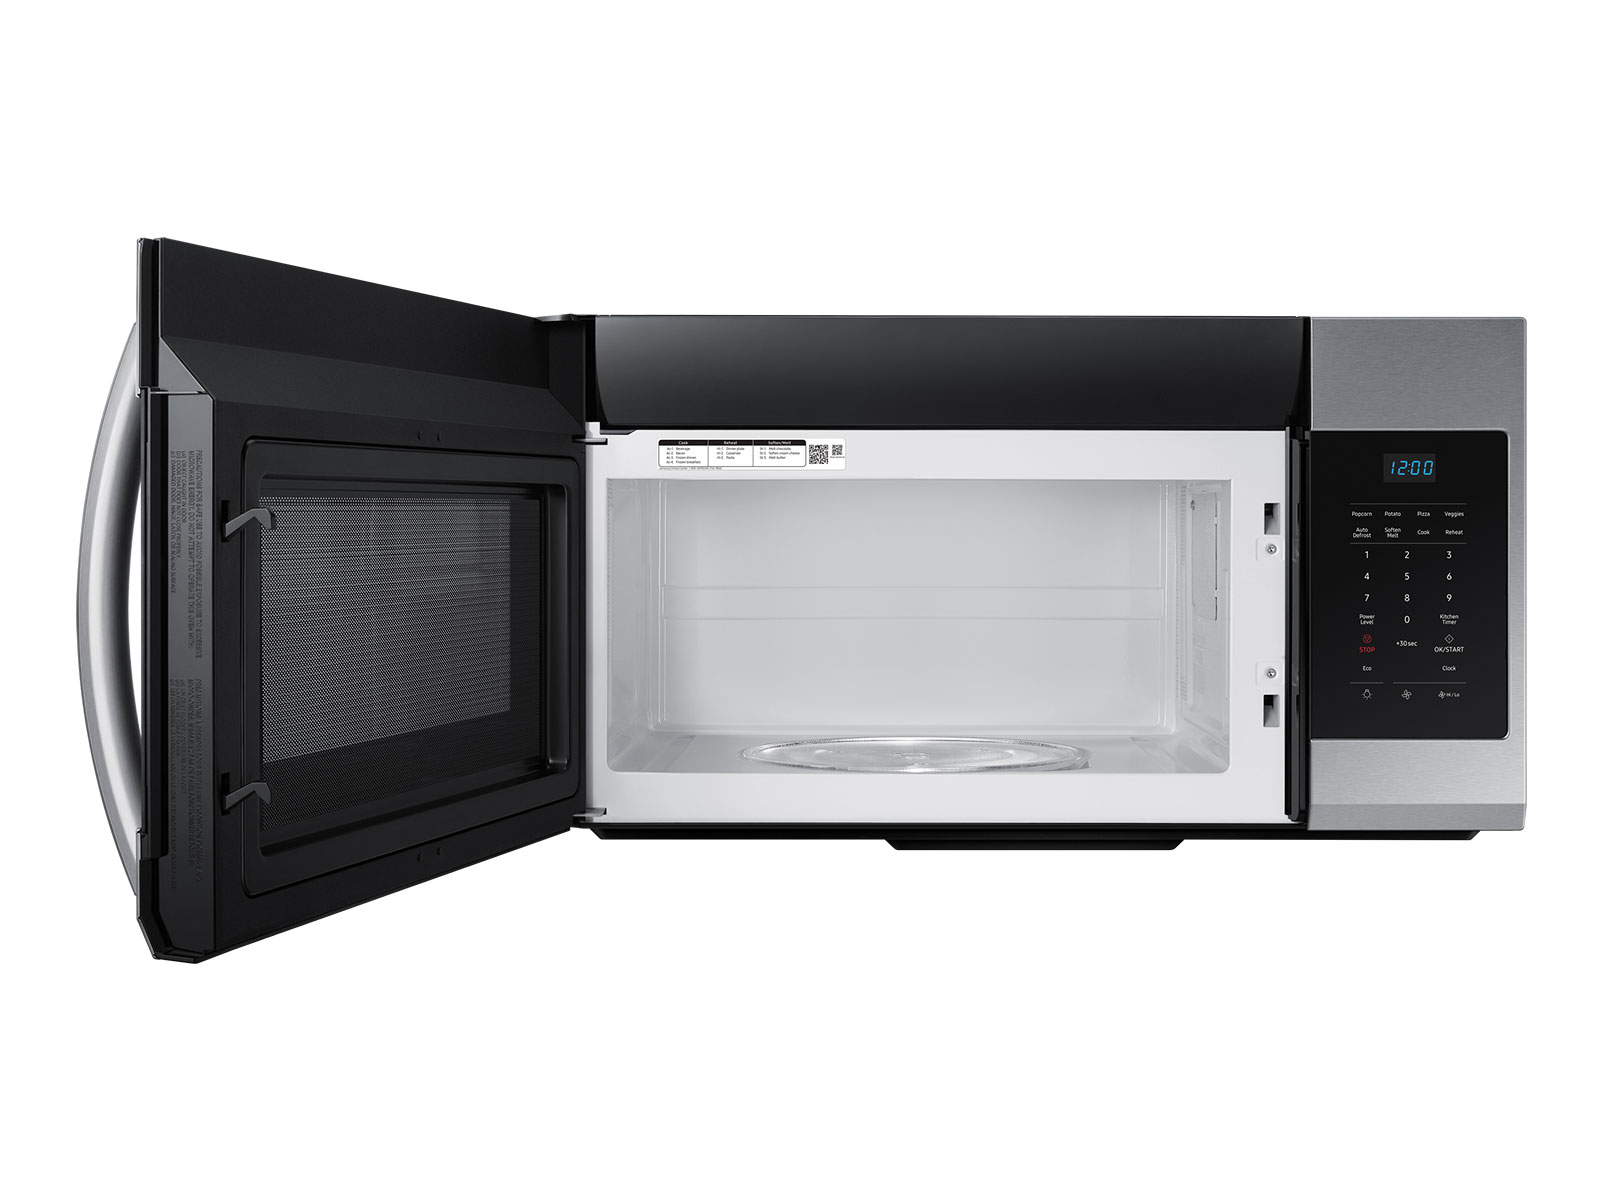 https://image-us.samsung.com/SamsungUS/home/home-appliances/microwaves/over-the-range/pdp/-me17r7021e/silver/PDP-GALLERY-R7021-002-Silver-1600x1200.jpg?$product-details-jpg$